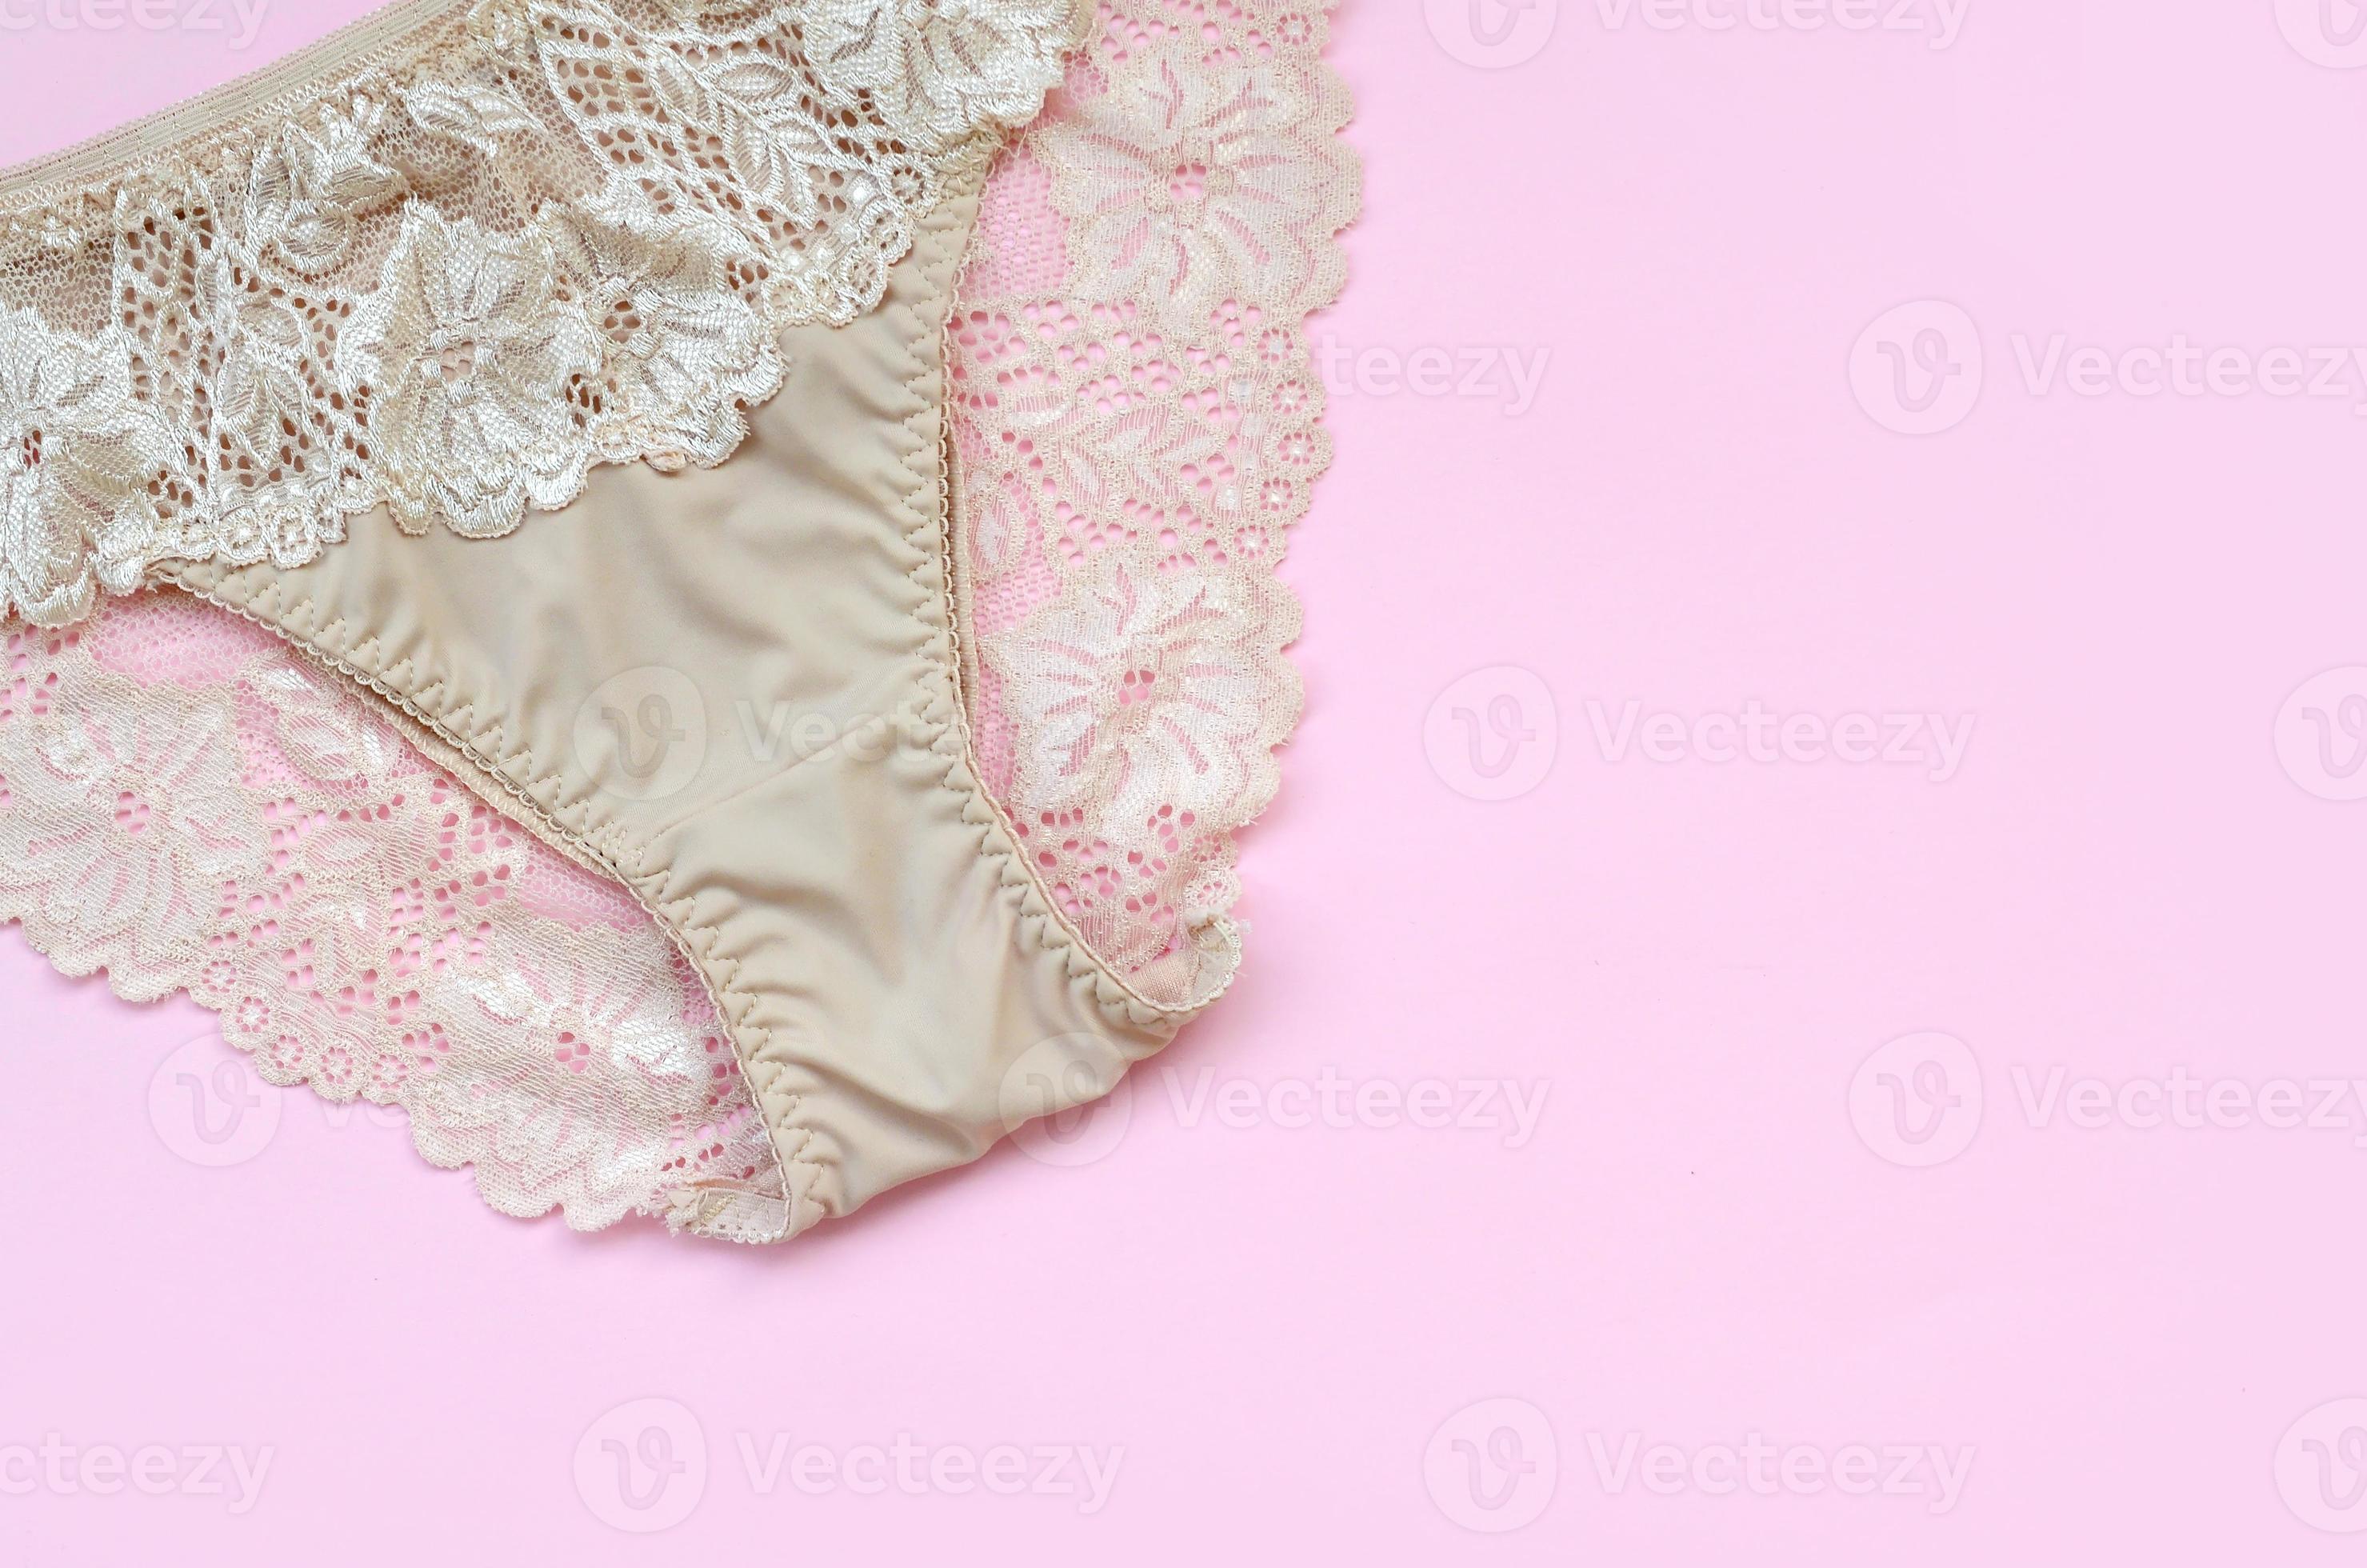 https://static.vecteezy.com/system/resources/previews/014/188/235/large_2x/beige-women-underwear-with-lace-on-pink-background-with-copy-space-beauty-fashion-blogger-concept-romantic-lingerie-for-valentines-day-temptation-photo.JPG